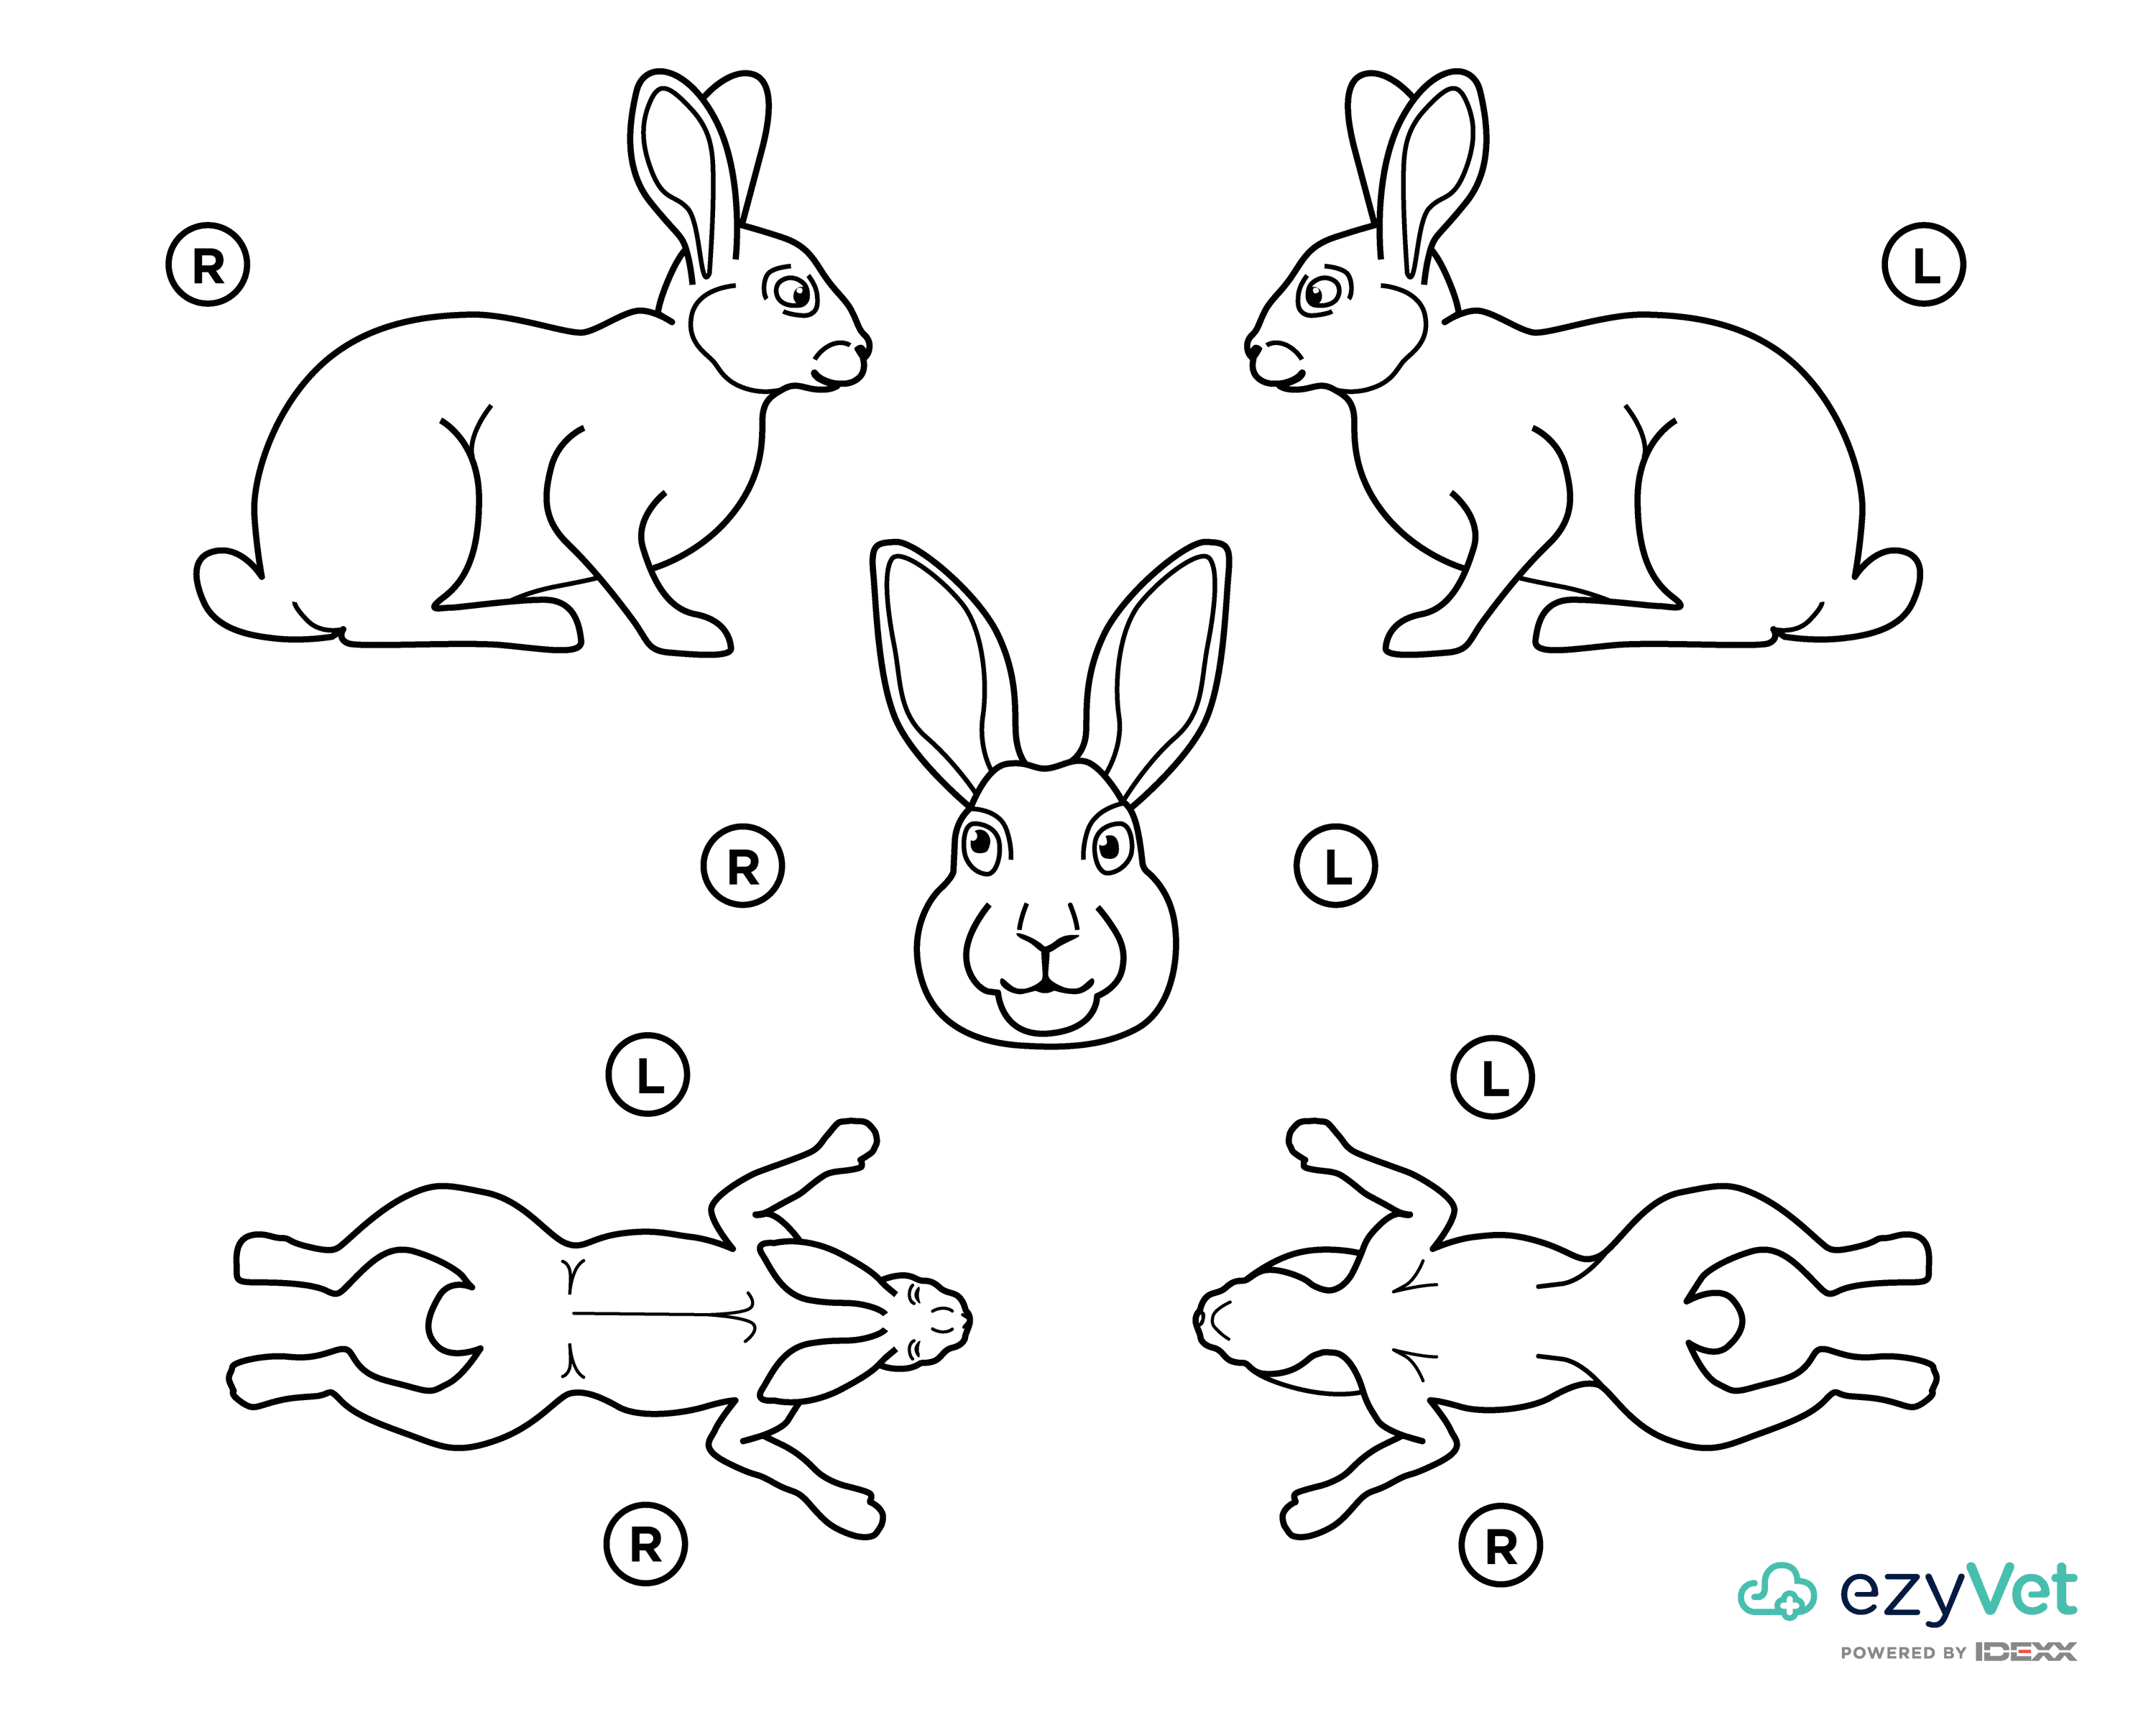 Rabbit Lapine Body Map for vets and annotation